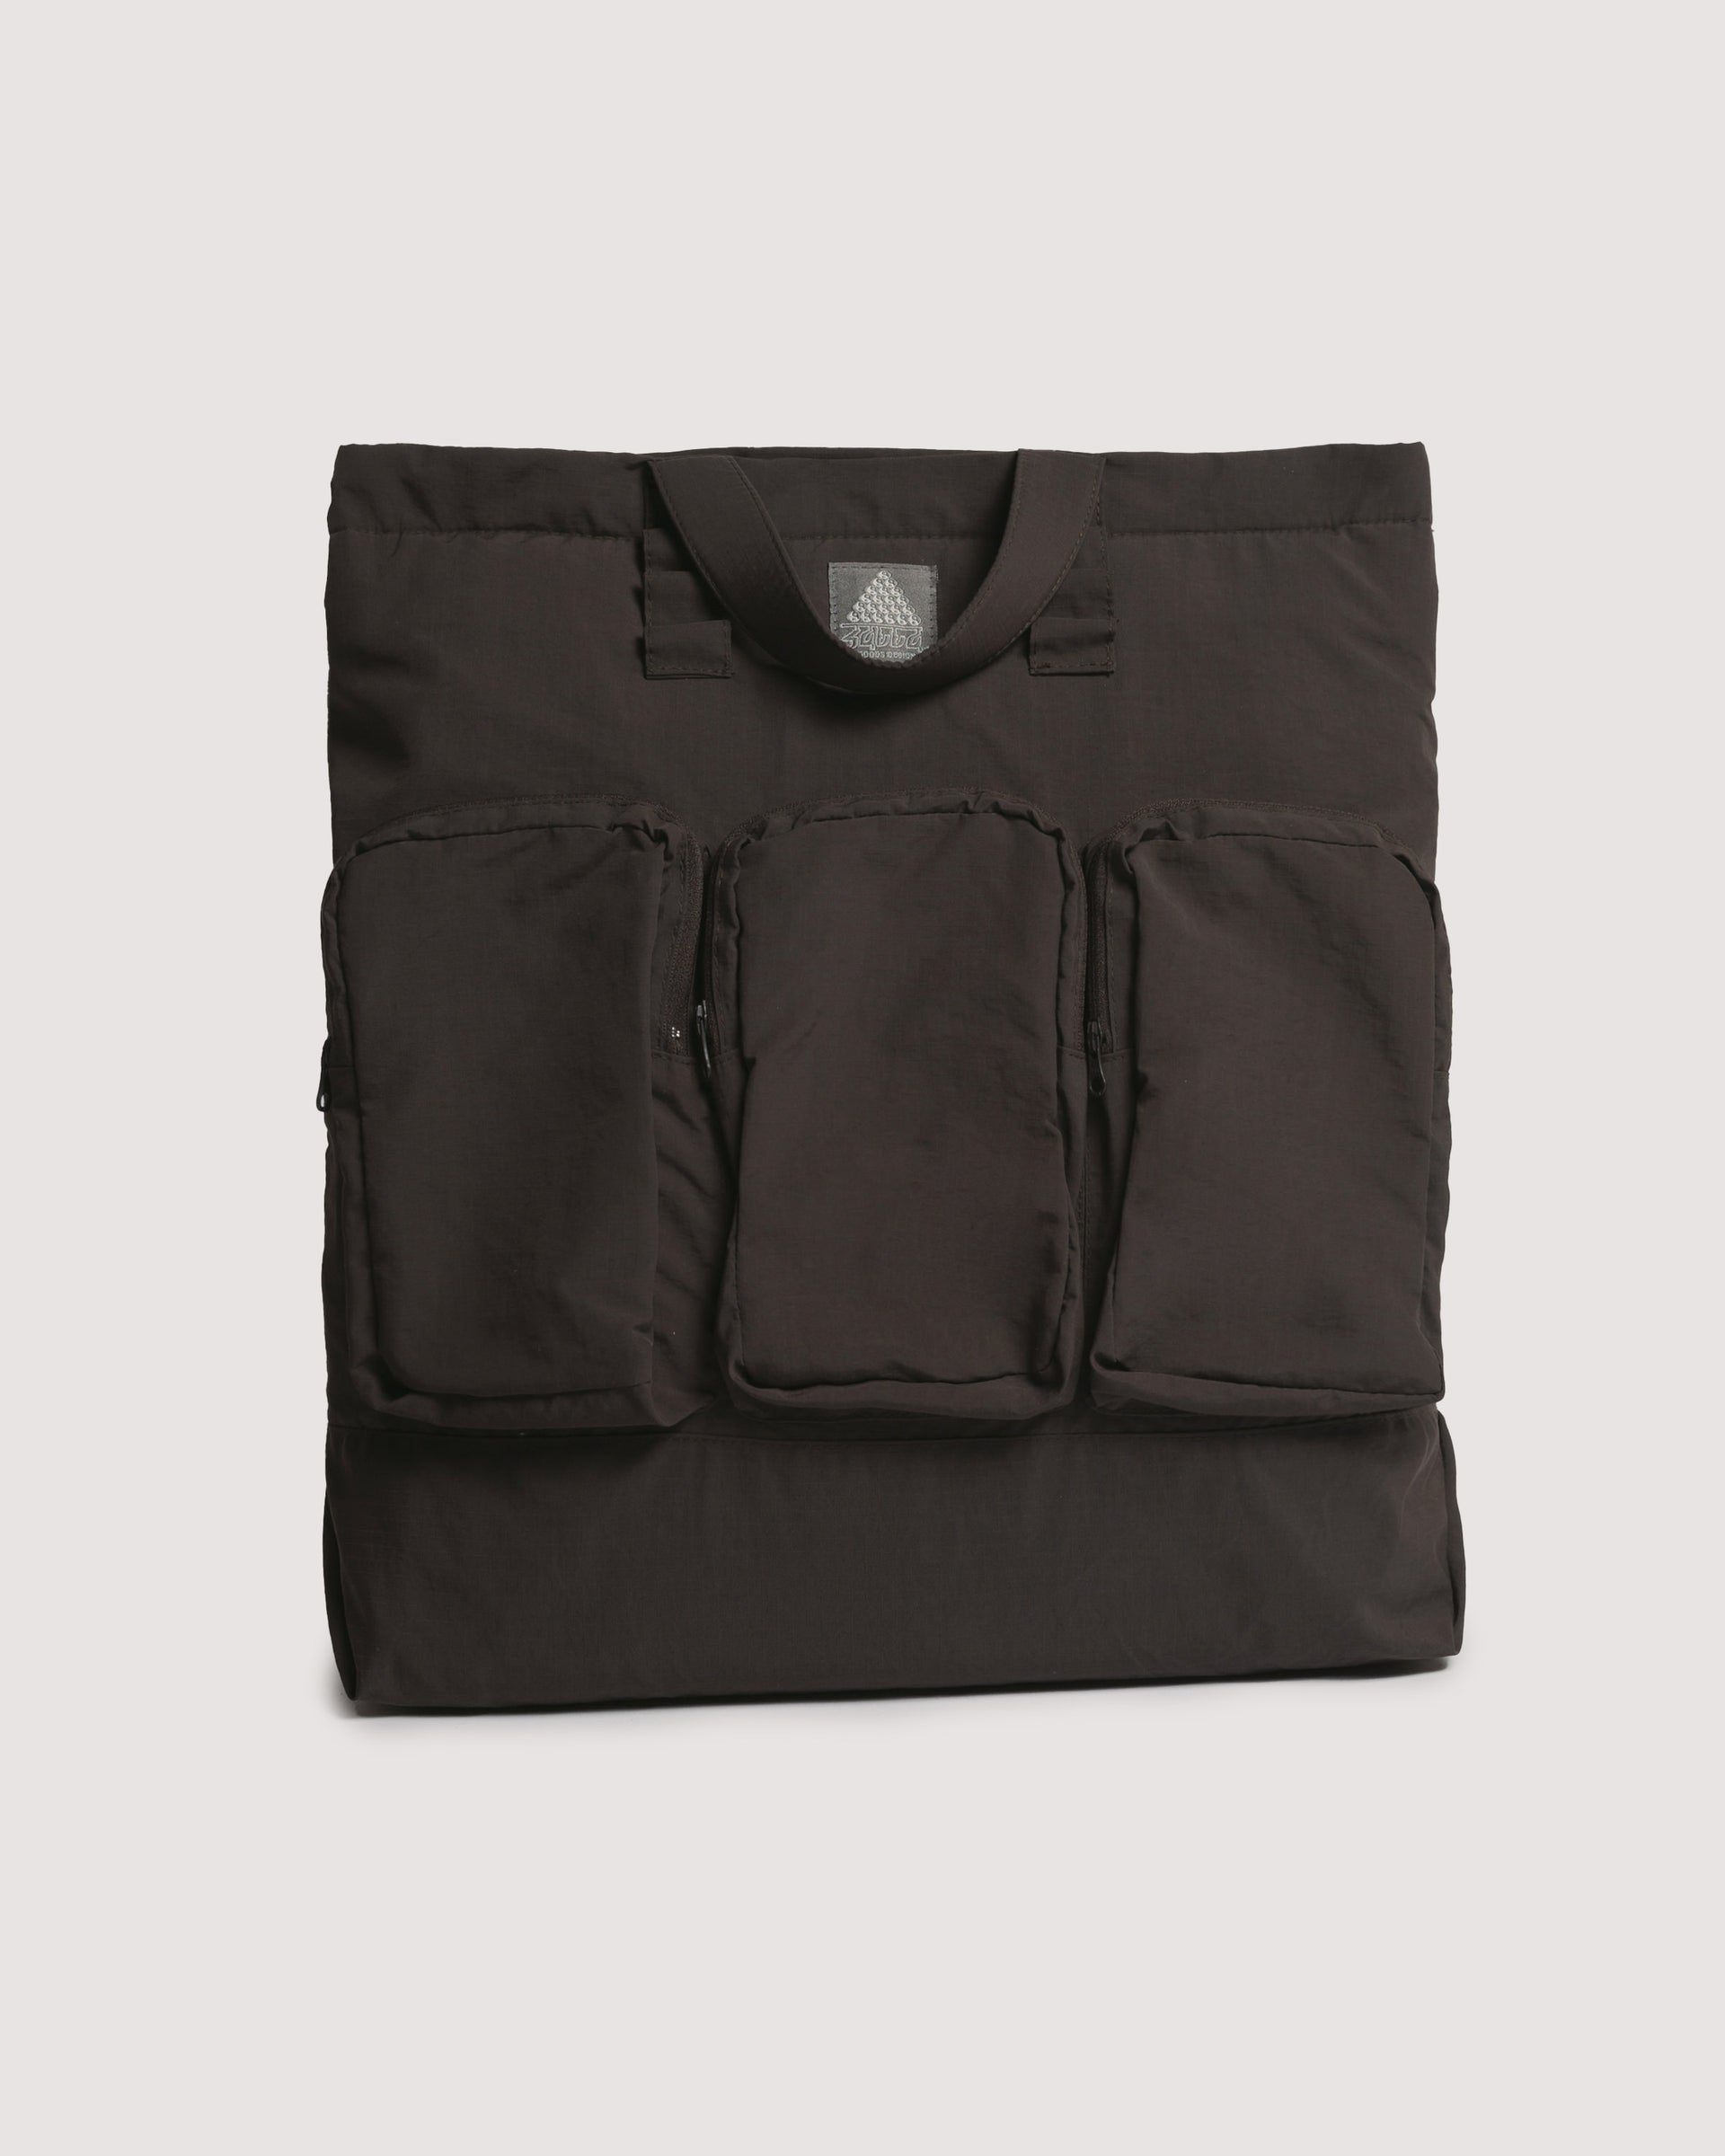 Cargo Tote - Charcoal